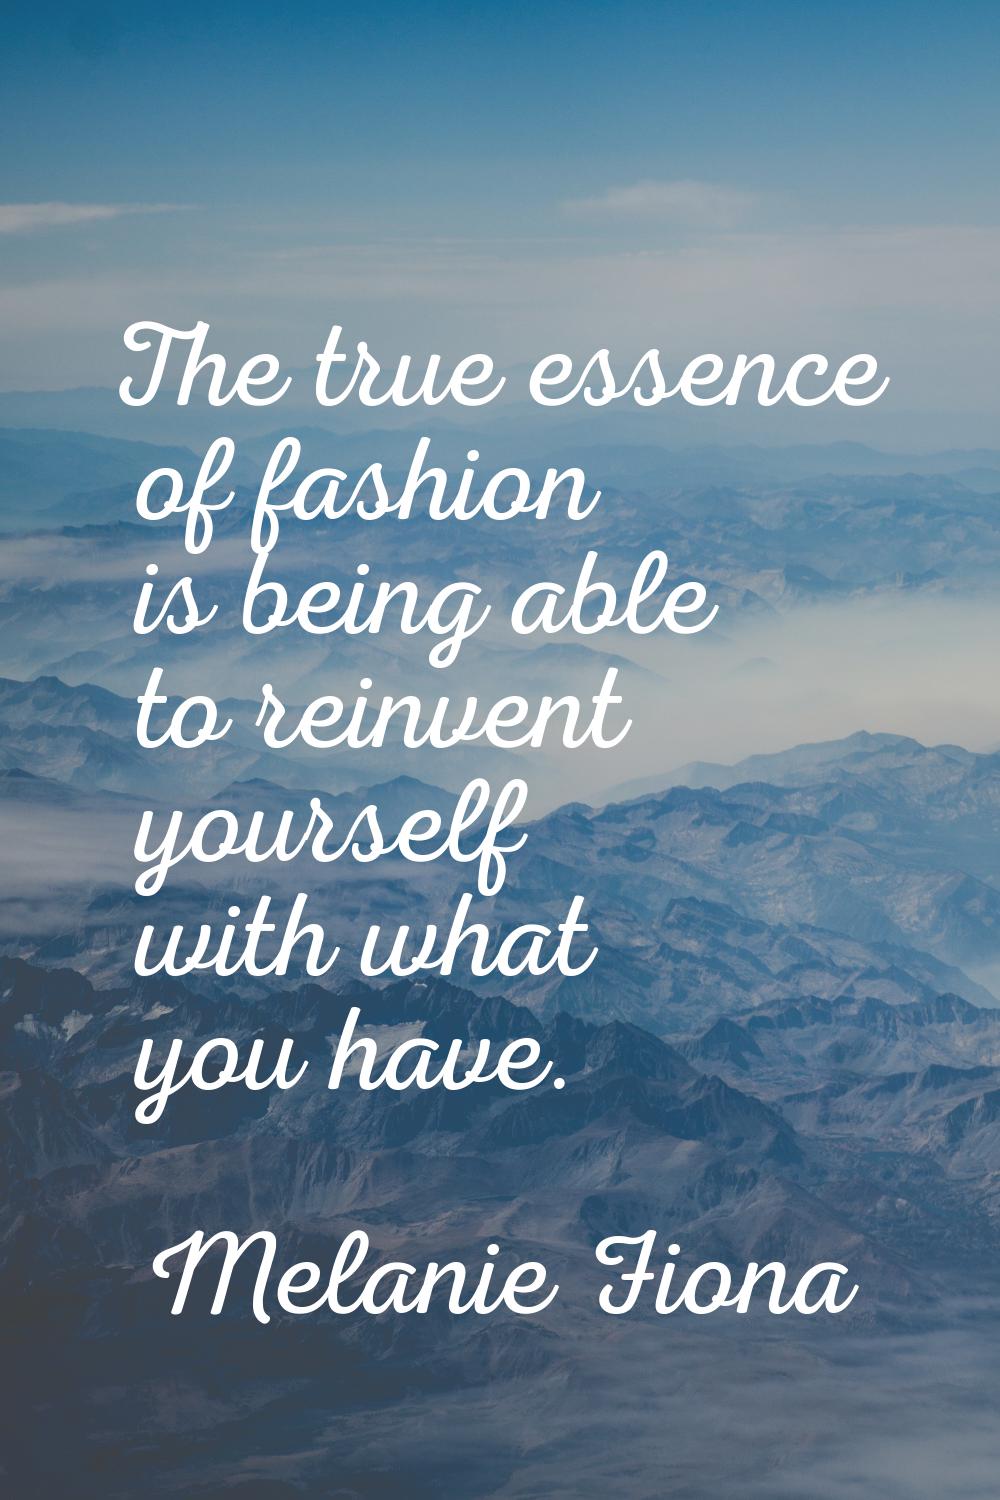 The true essence of fashion is being able to reinvent yourself with what you have.